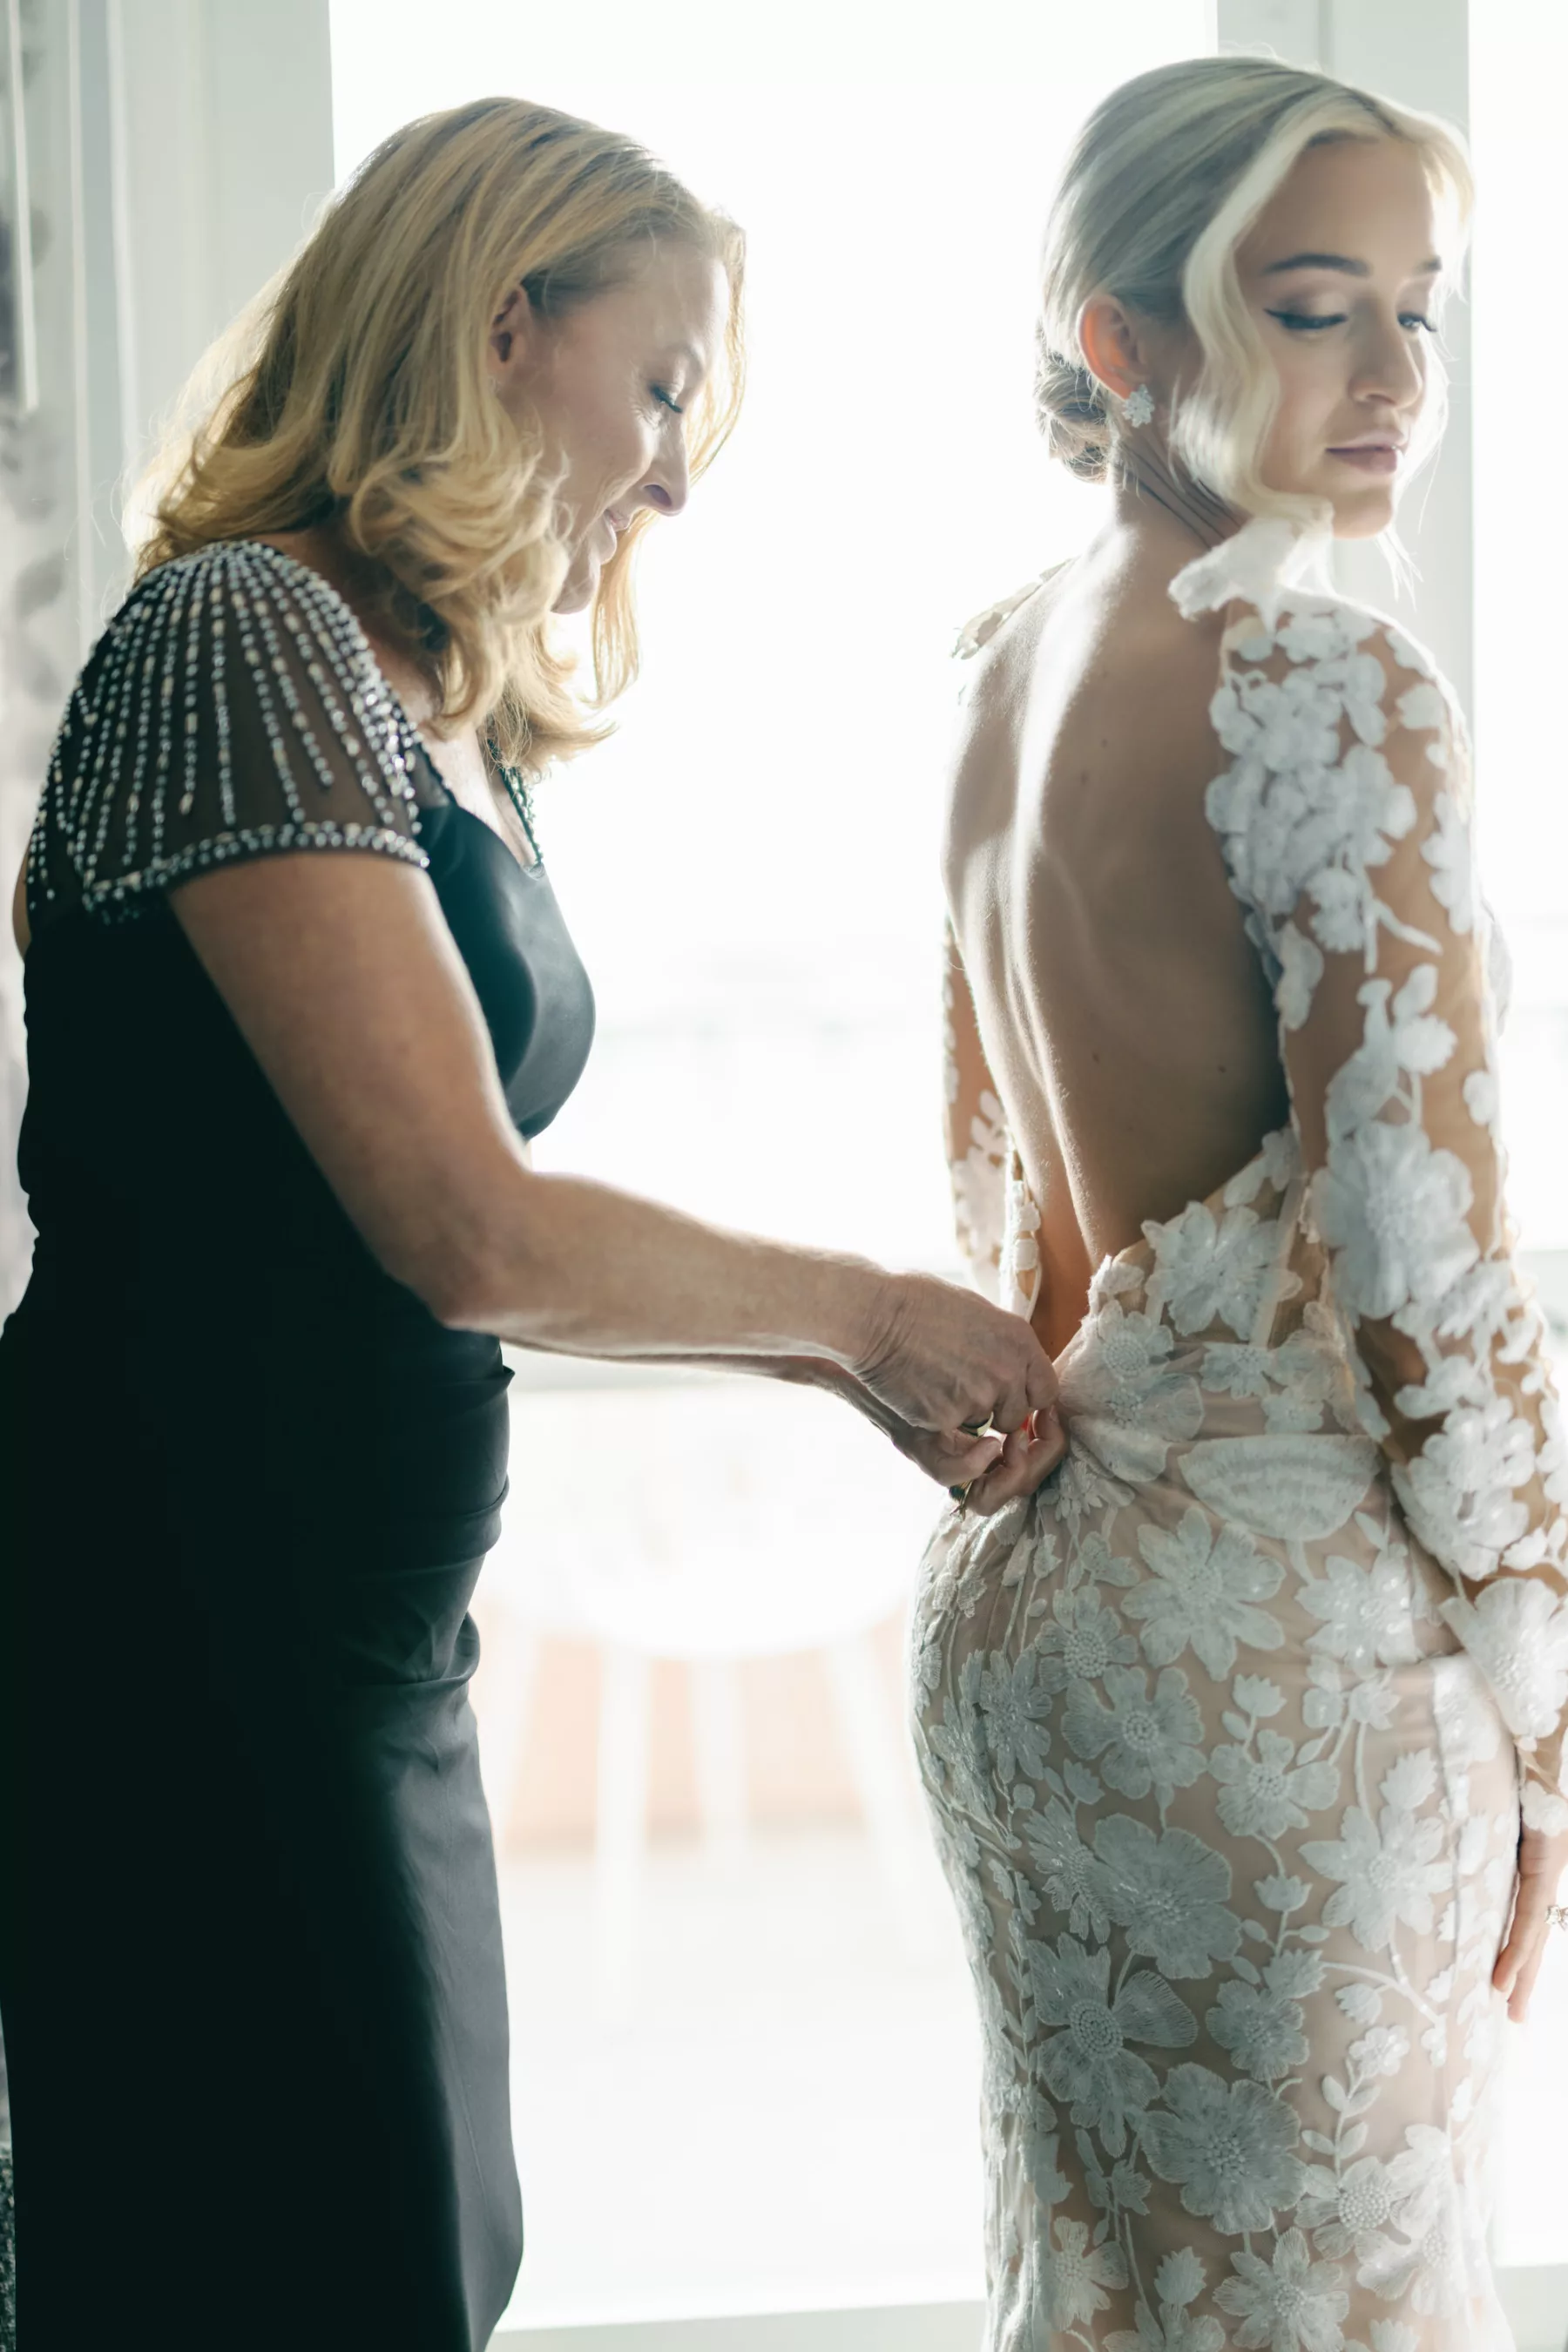 Bride Getting Ready Wedding Portrait | Black Mother of the Bride Dress Ideas | Long Sleeve Embroidered Flower Fit and Flare Anne Barge Solana Wedding Dress Inspiration